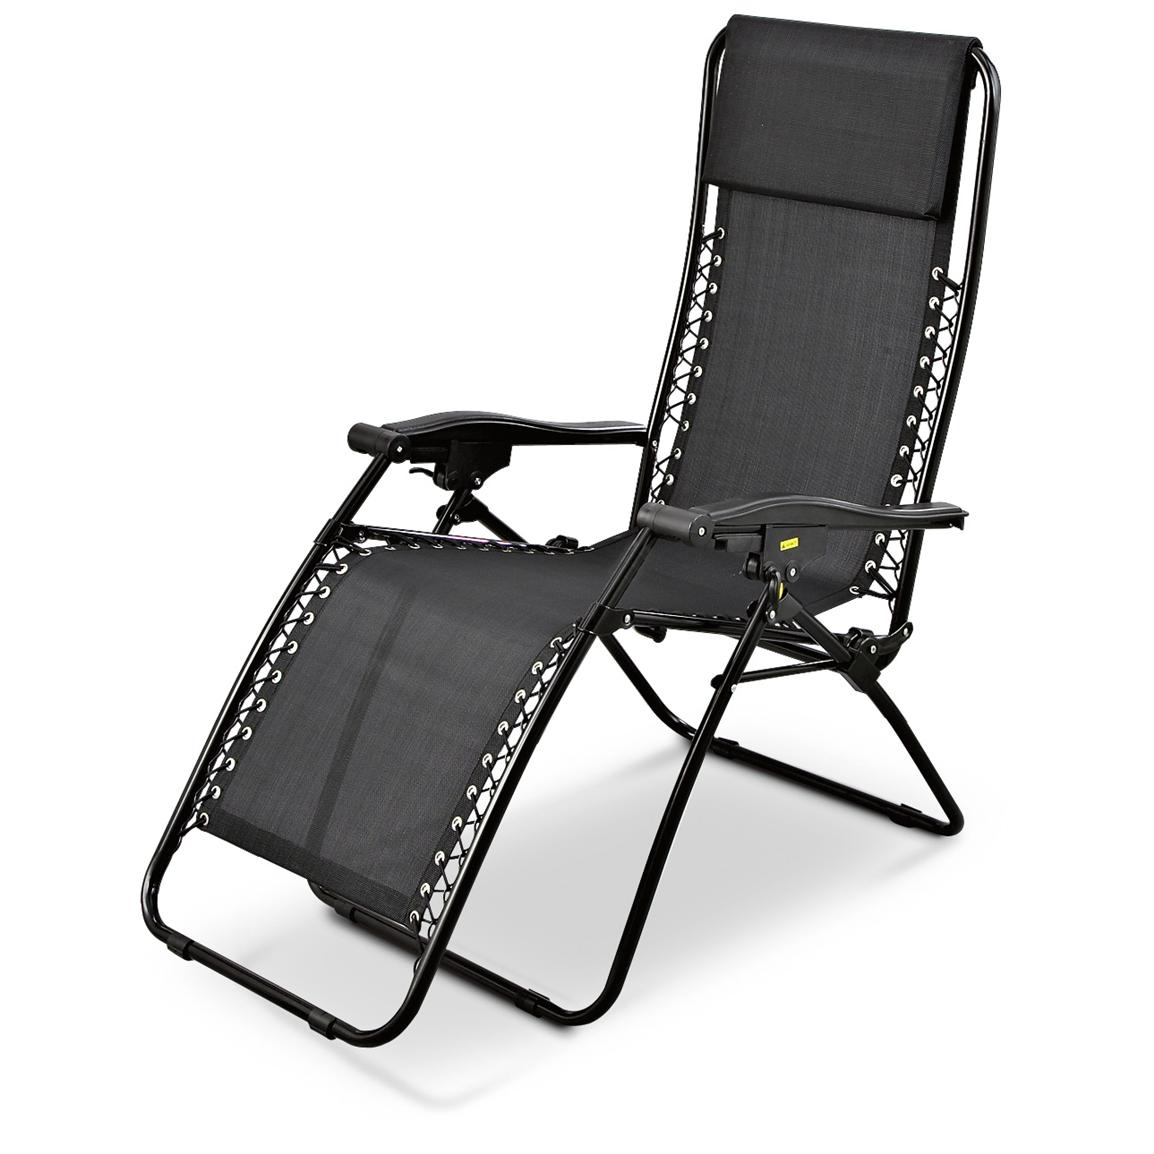 Zero Gravity Lounge Chair - 175456, Chairs at Sportsman's Guide